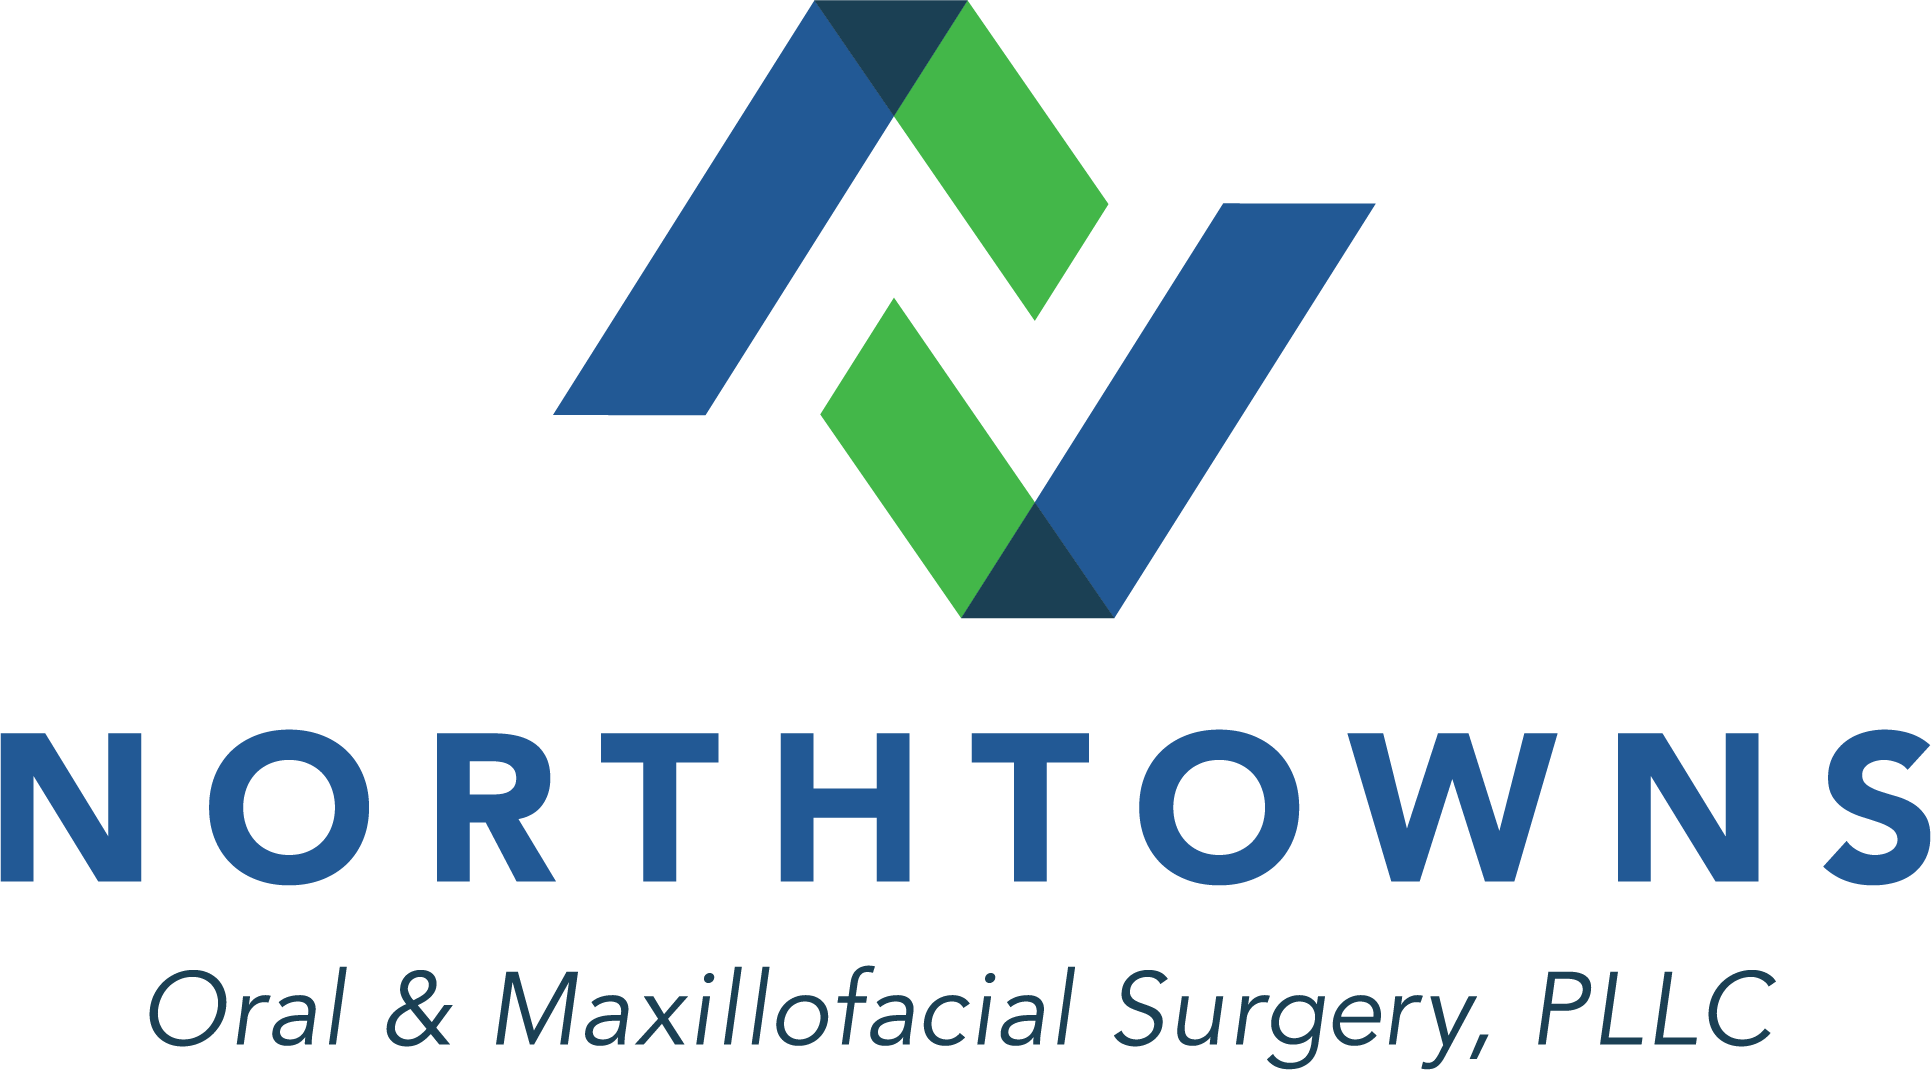 Link to Northtowns Oral and Maxillofacial Surgery, PLLC home page